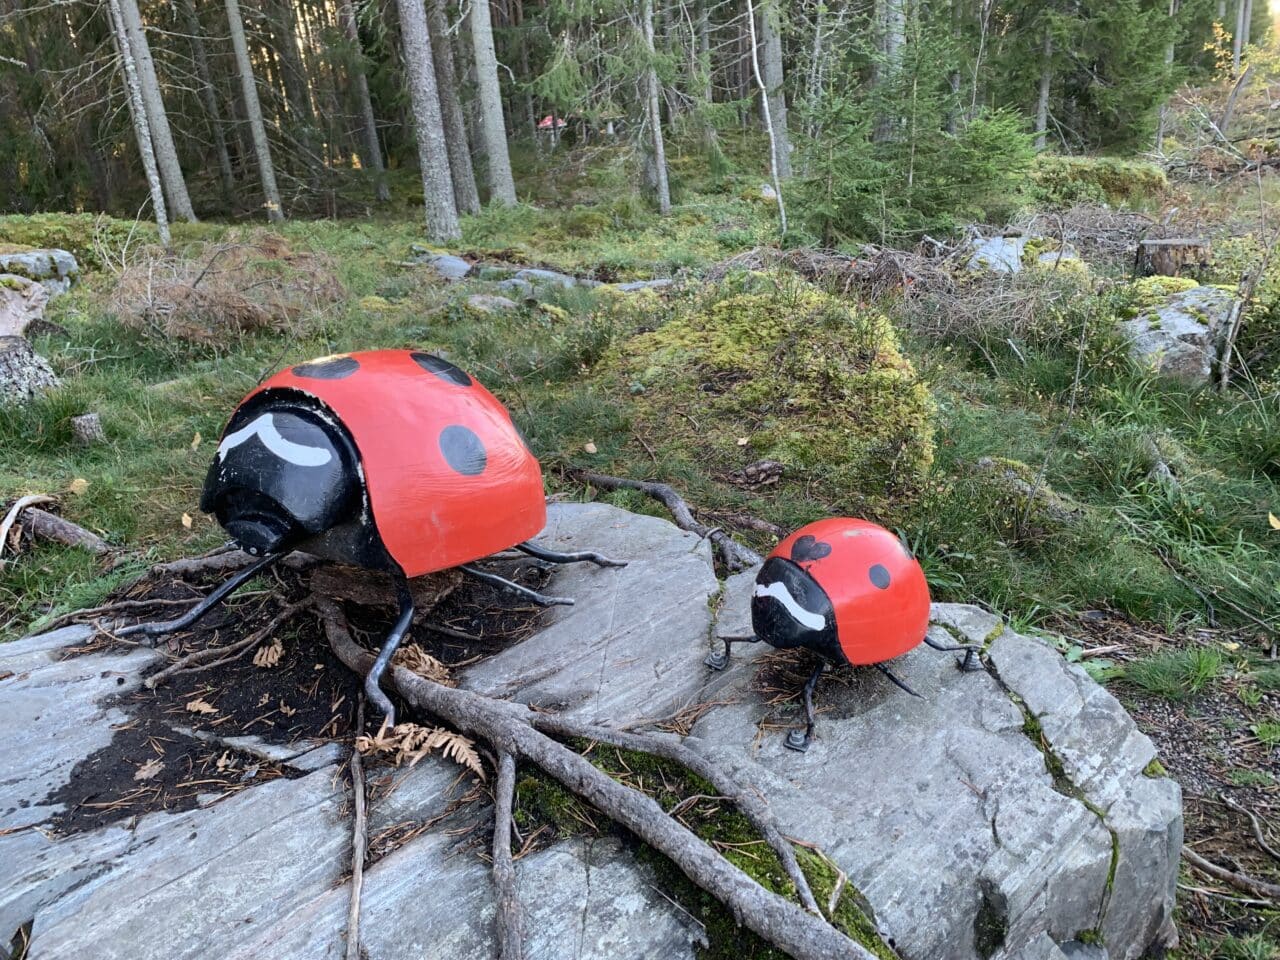 Two Wooden Lady Bugs On A Rock In The Forest